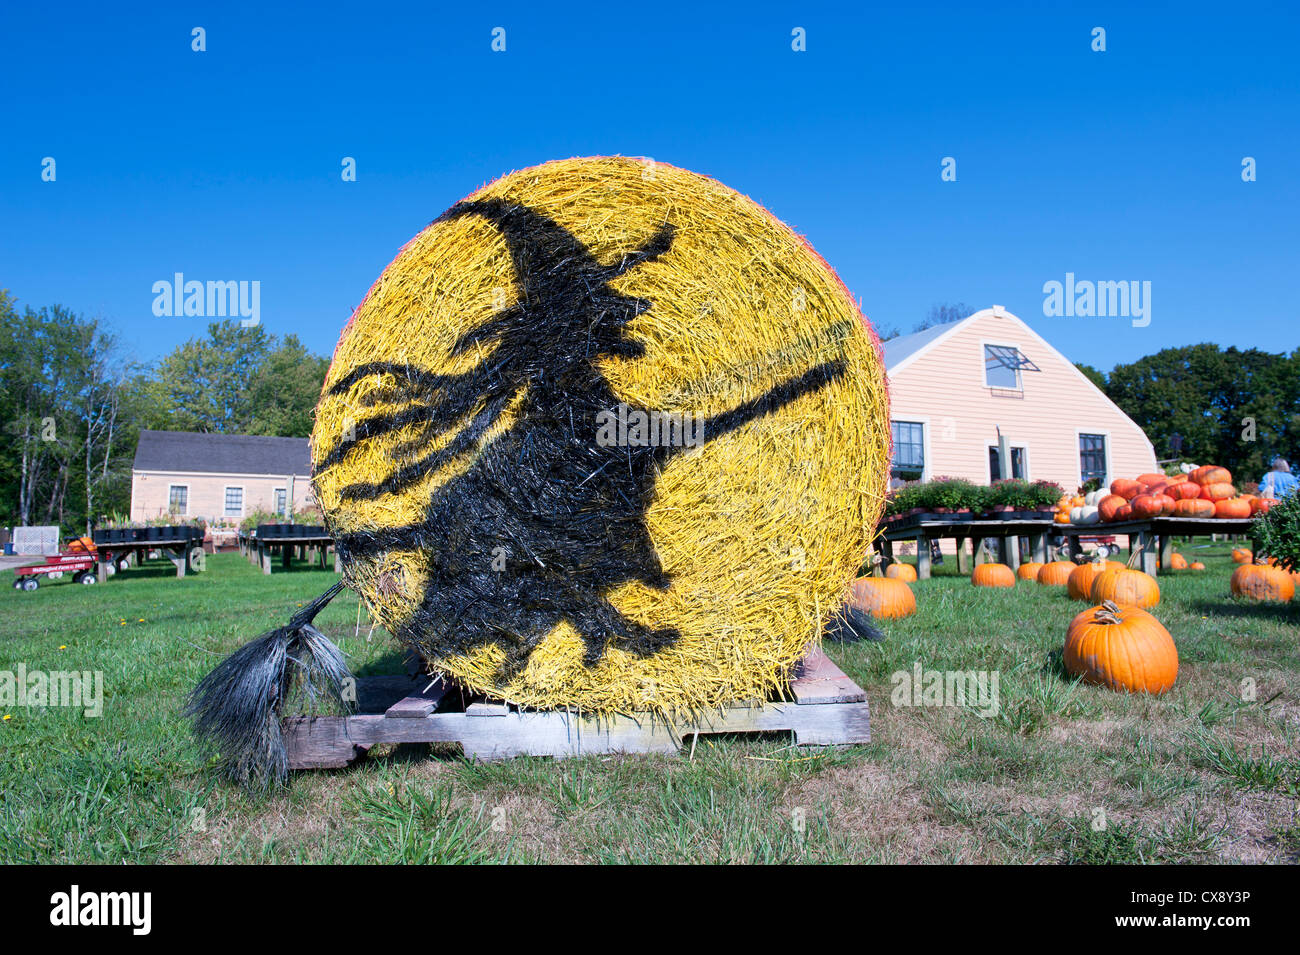 Decorated Hay Bale High Resolution Stock Photography And Images Alamy